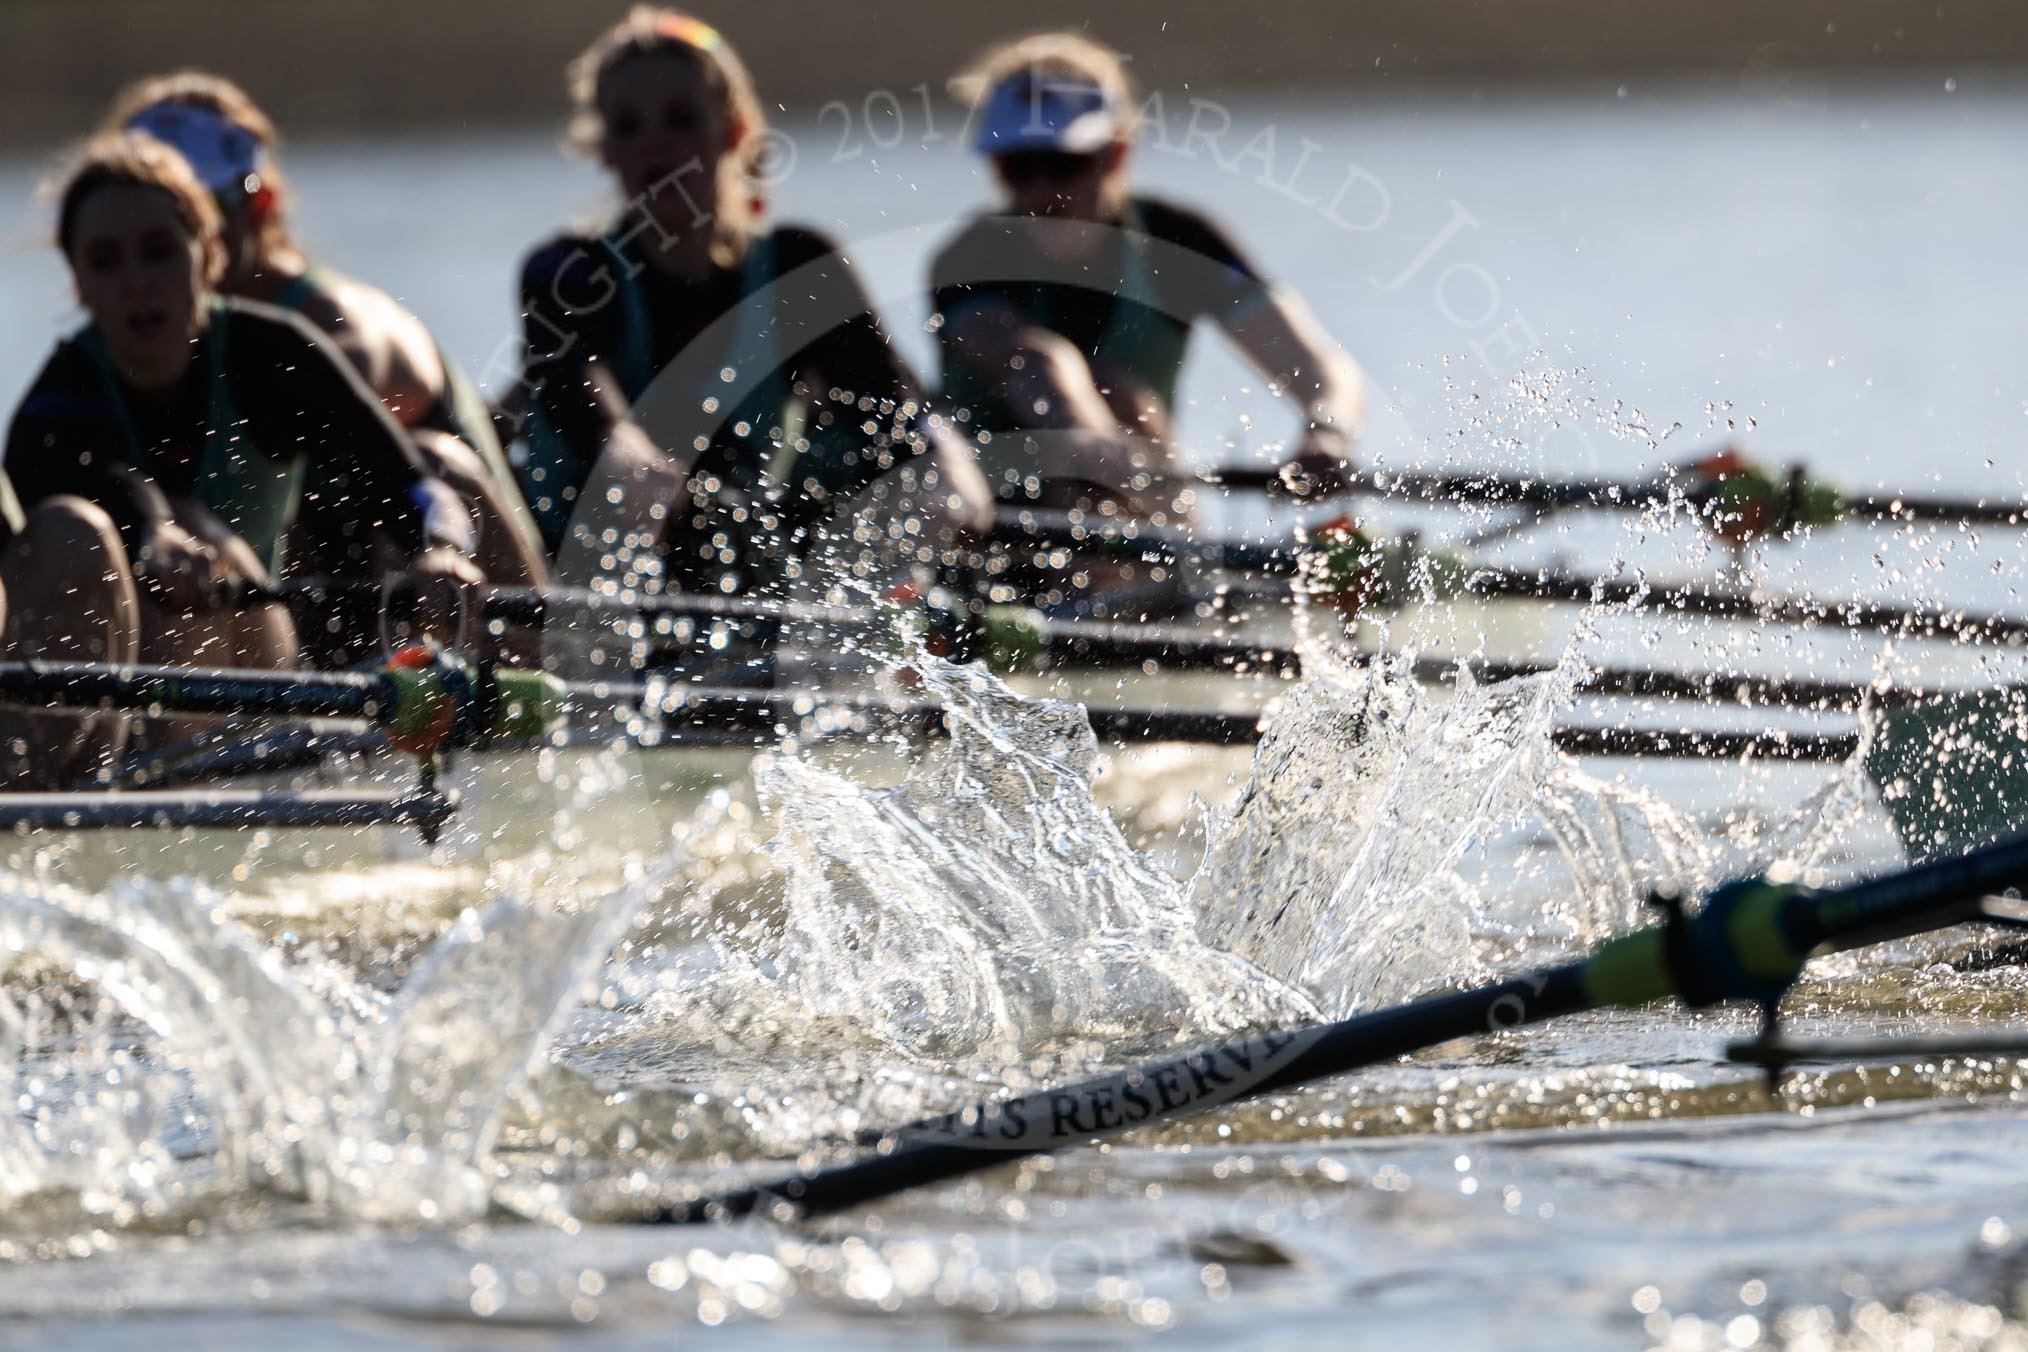 The Women's Boat Race season 2018 - fixture CUWBC vs. ULBC: OUWBC and ULBC during the early phase of the second race.
River Thames between Putney Bridge and Mortlake,
London SW15,

United Kingdom,
on 17 February 2018 at 13:30, image #129